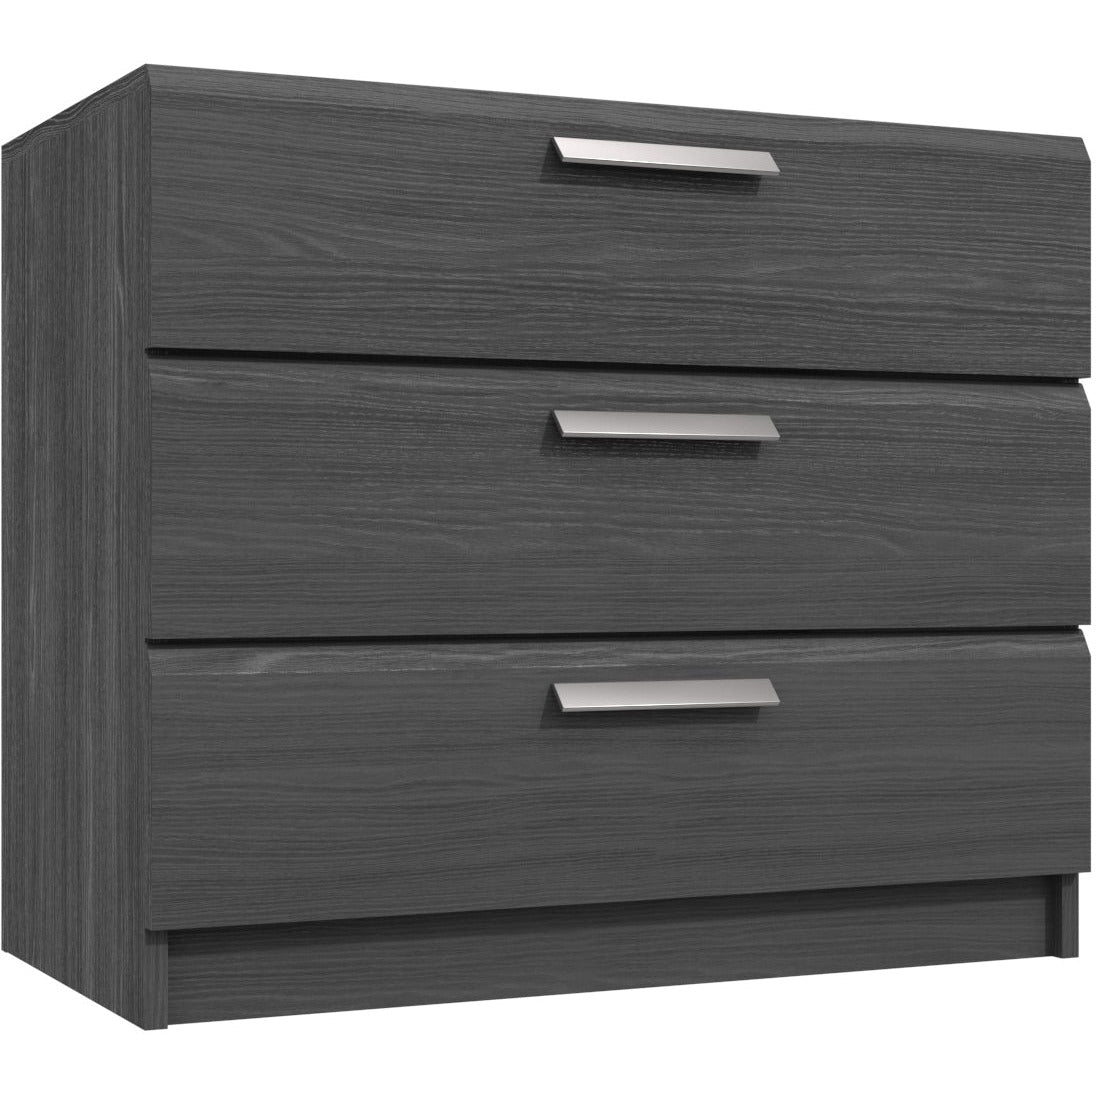 Waterfall 3 Drawer Chest of Drawers Graphite